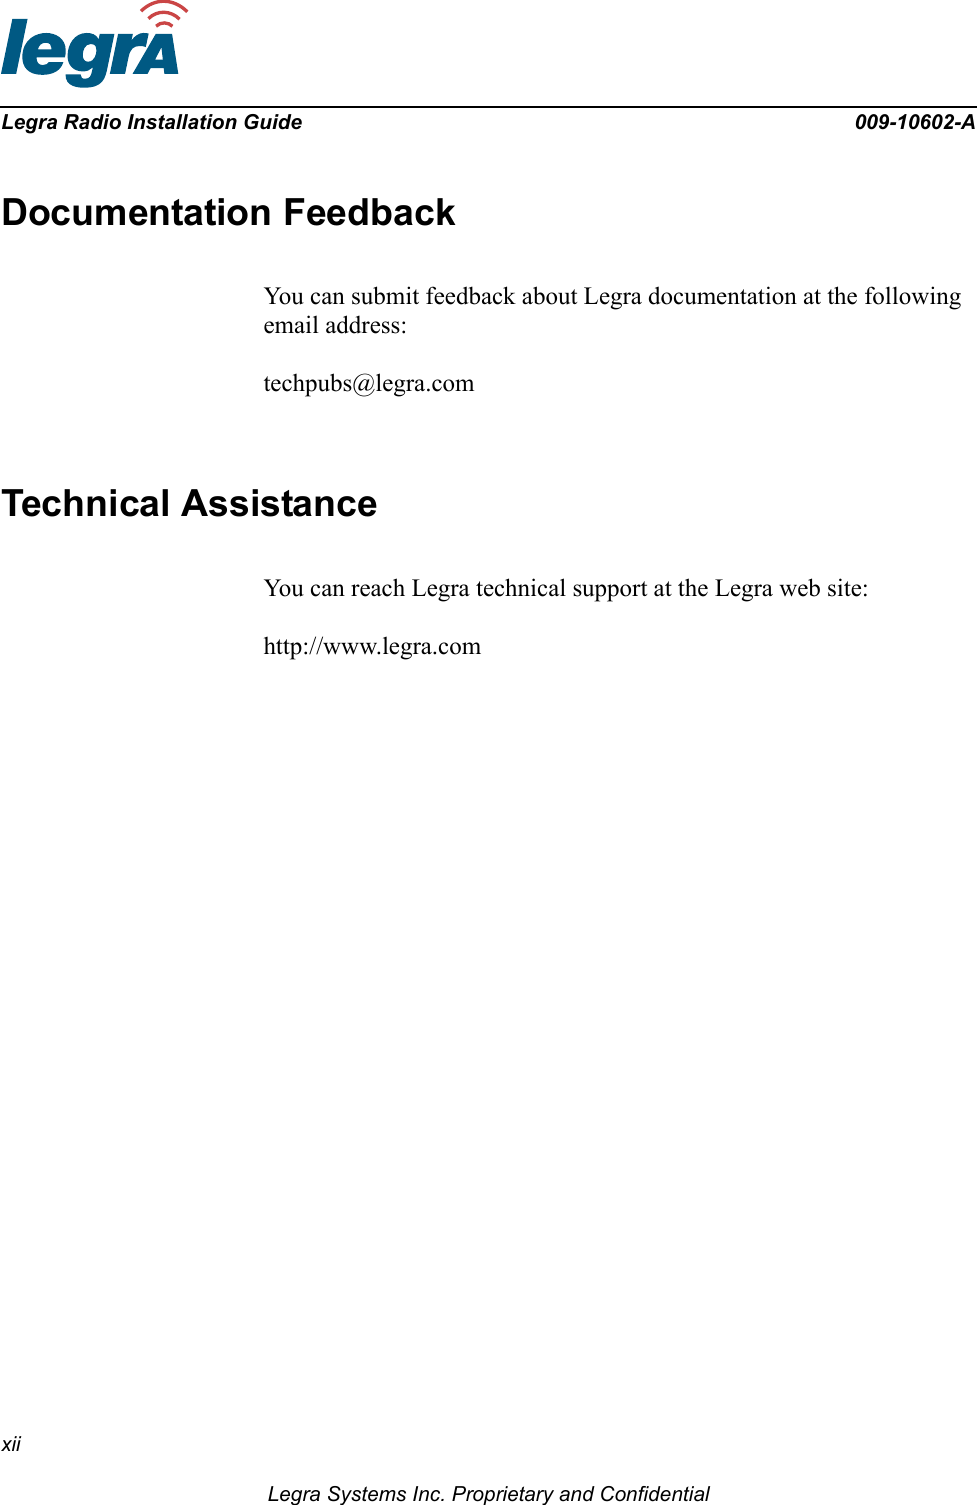 xiiLegra Systems Inc. Proprietary and ConfidentialLegra Radio Installation Guide 009-10602-ADocumentation FeedbackYou can submit feedback about Legra documentation at the following email address:techpubs@legra.comTechnical AssistanceYou can reach Legra technical support at the Legra web site:http://www.legra.com